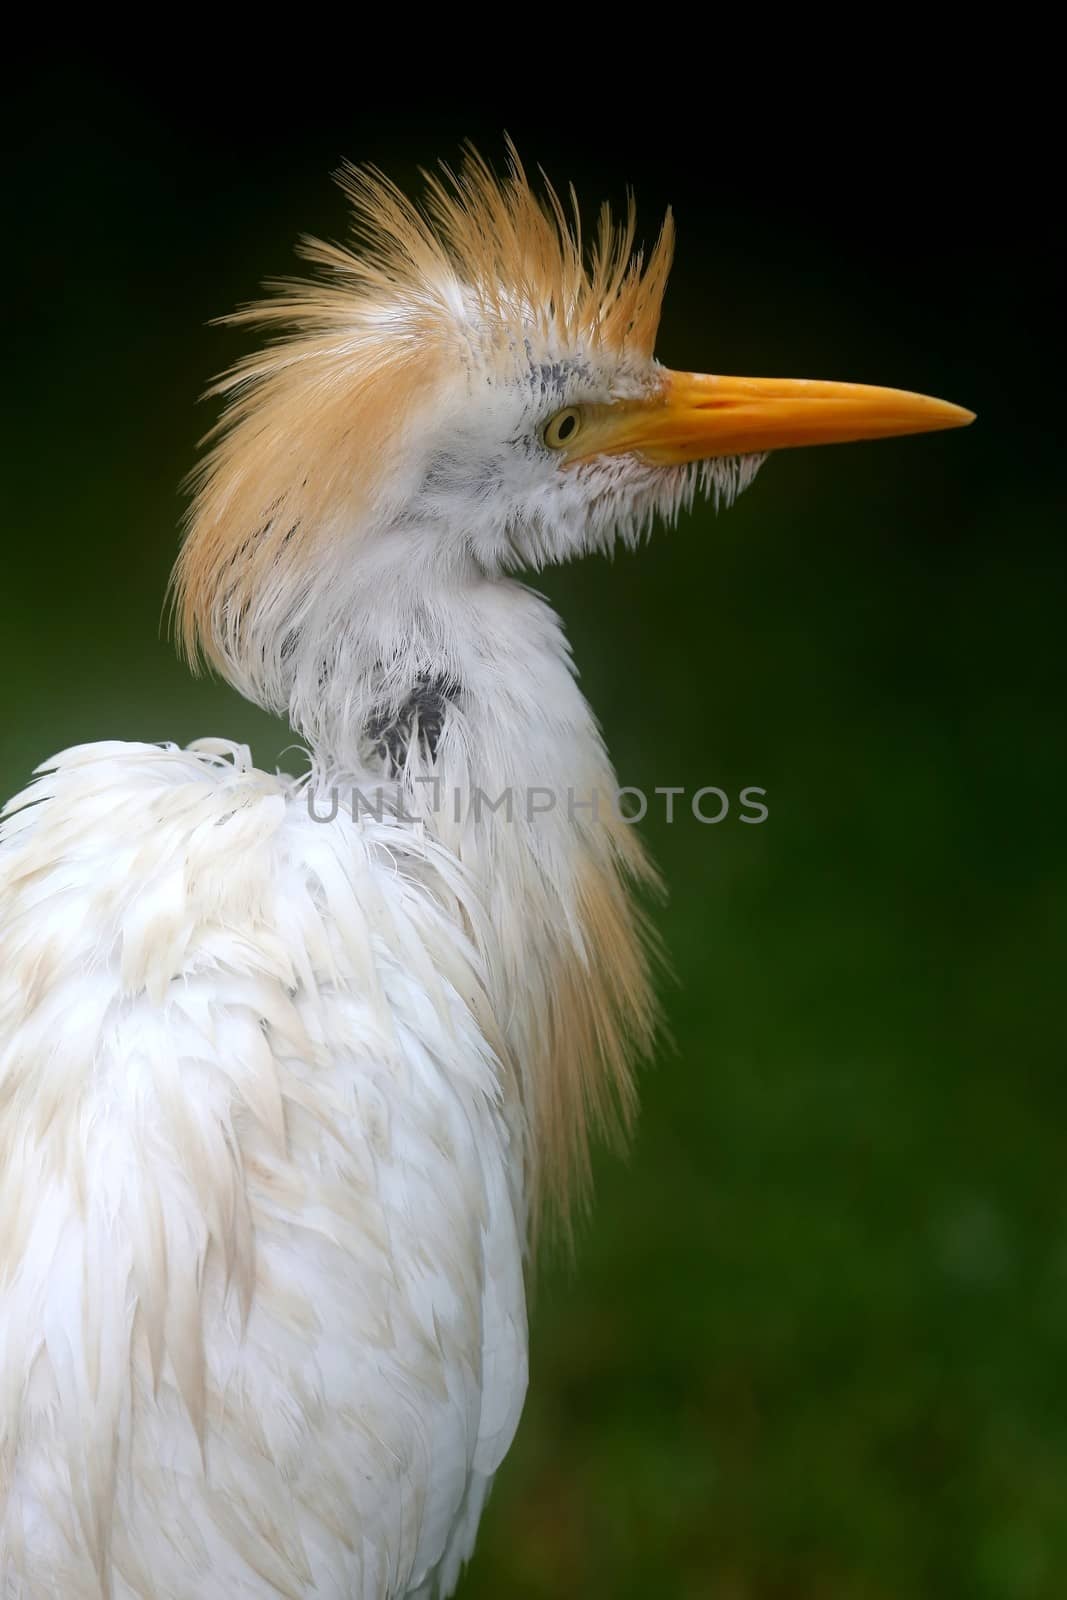 White egret bird with crest feathers looking like a bad hair do